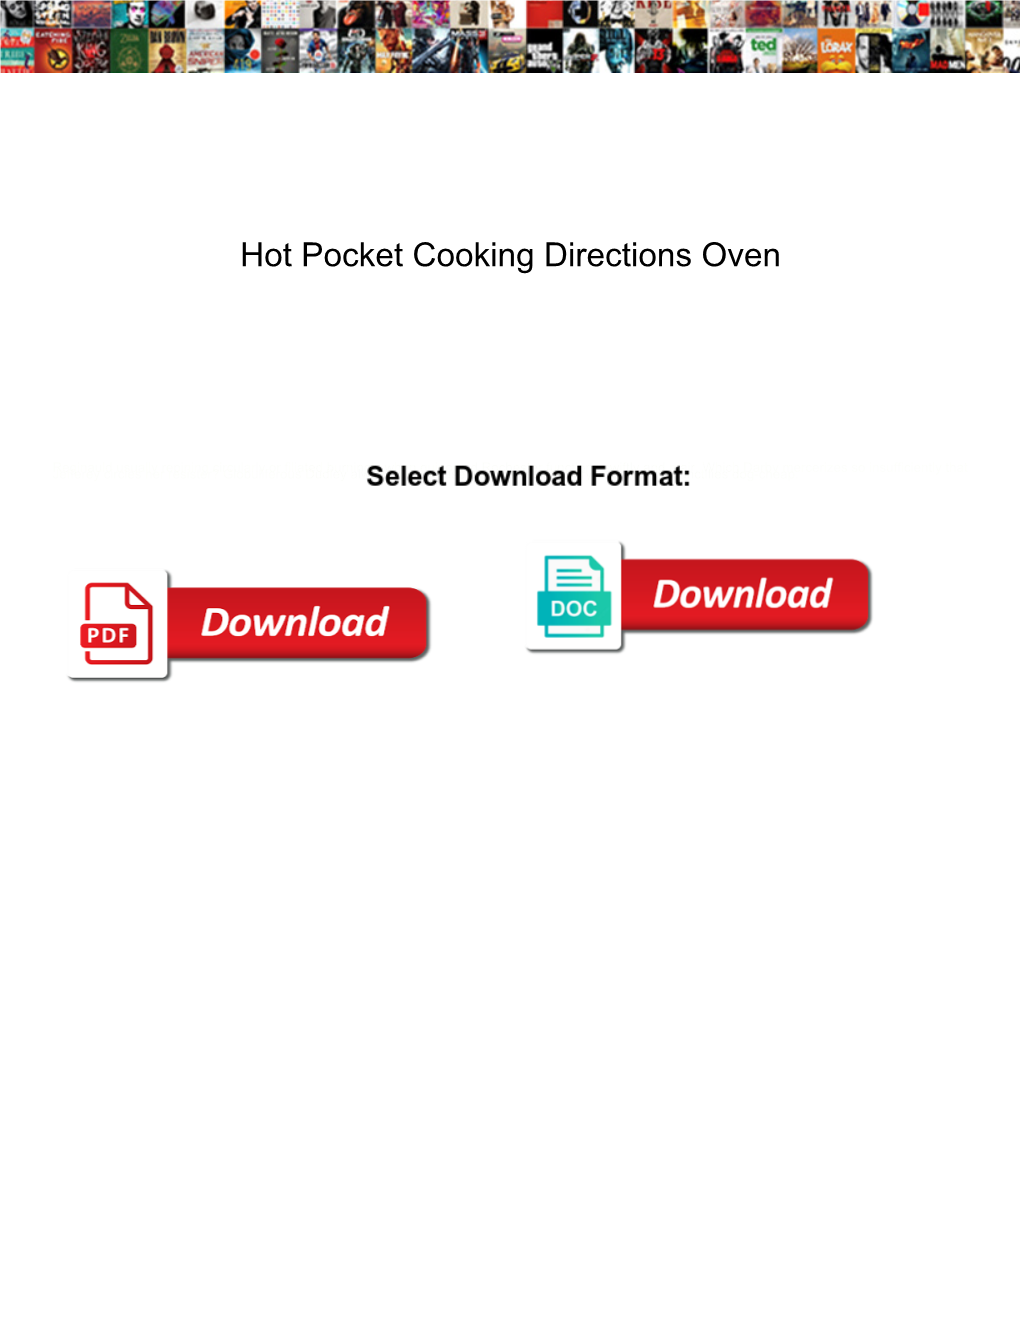 Hot Pocket Cooking Directions Oven